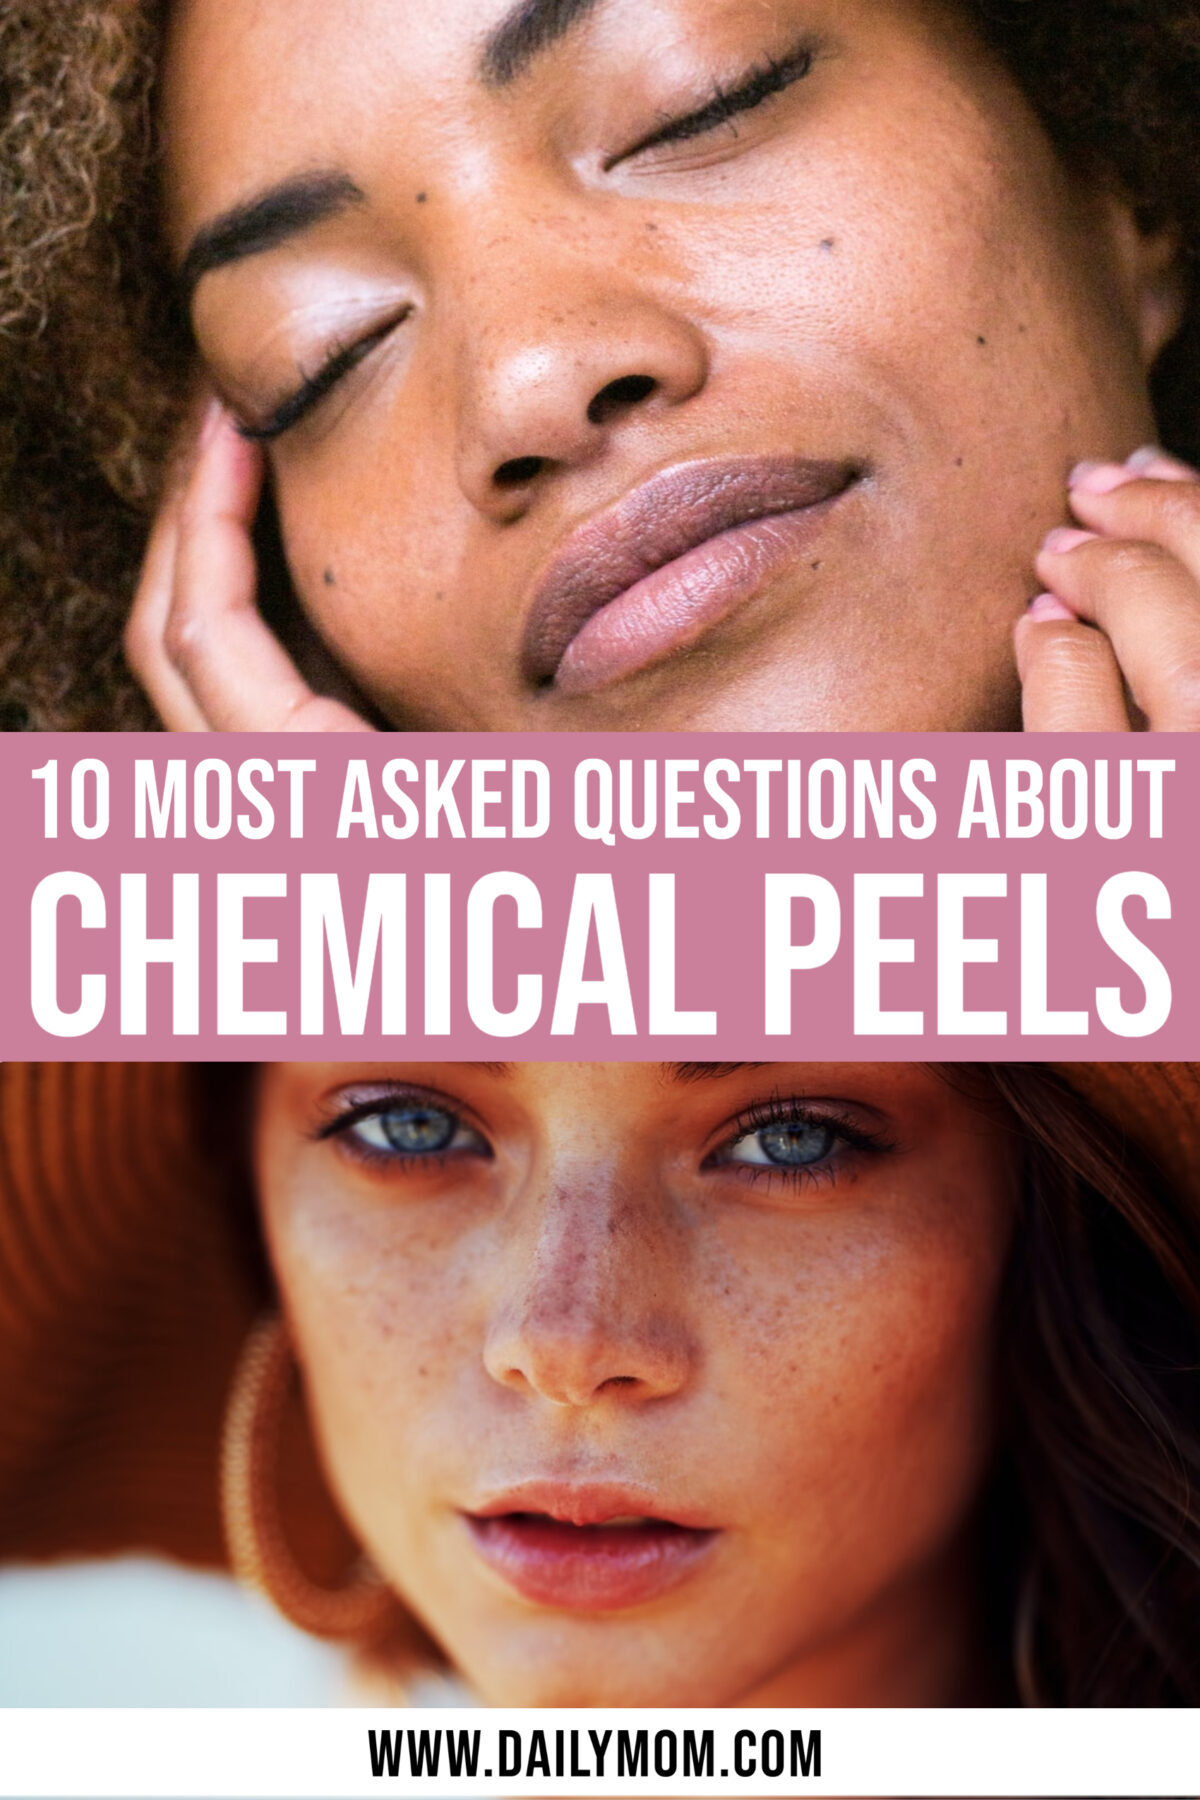 10 Most Asked Questions About Chemical Peels